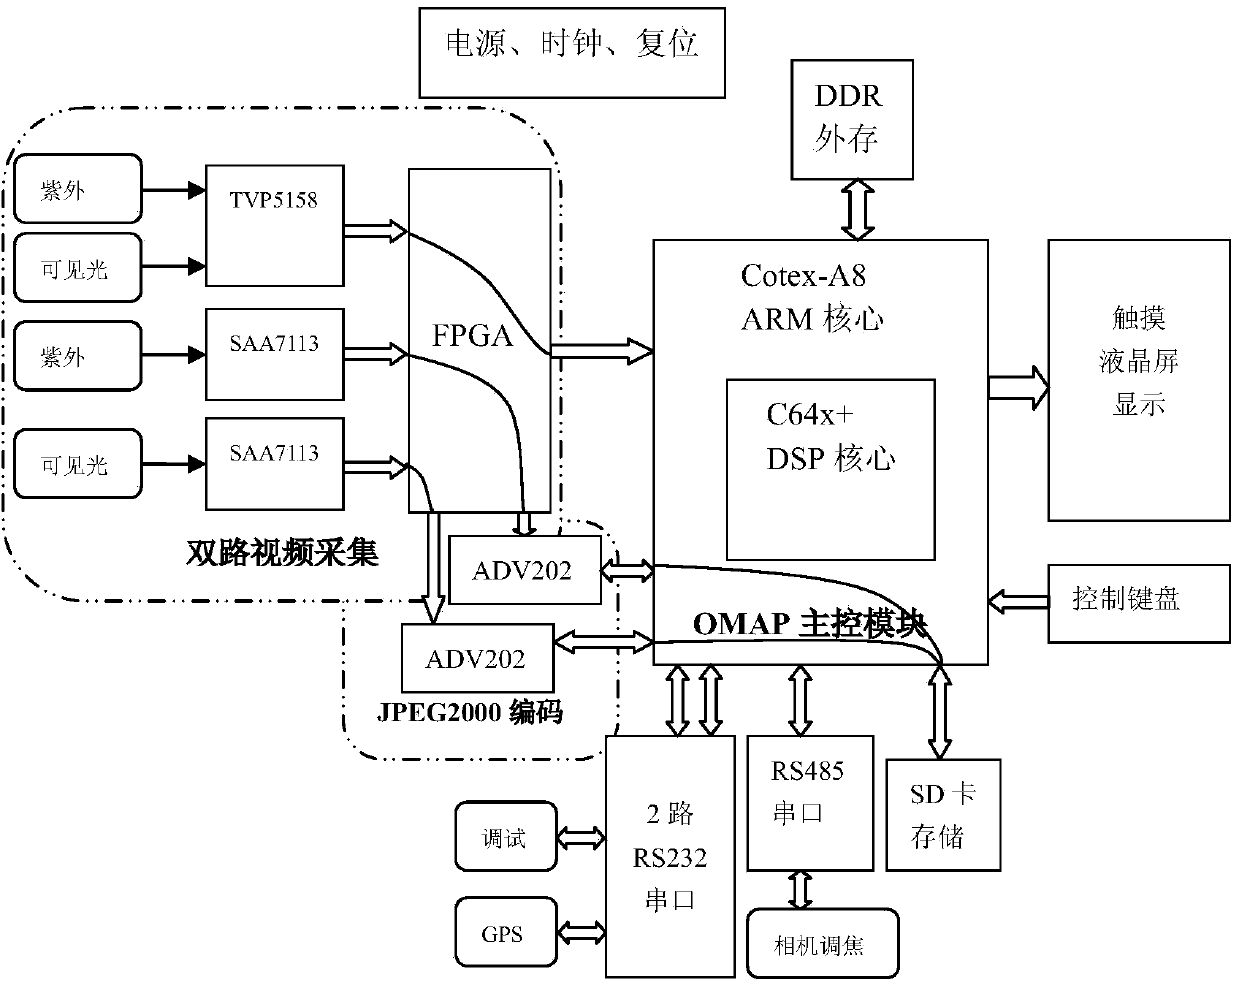 OMAP-based ultraviolet and visible light dual-channel image acquisition, processing and display system